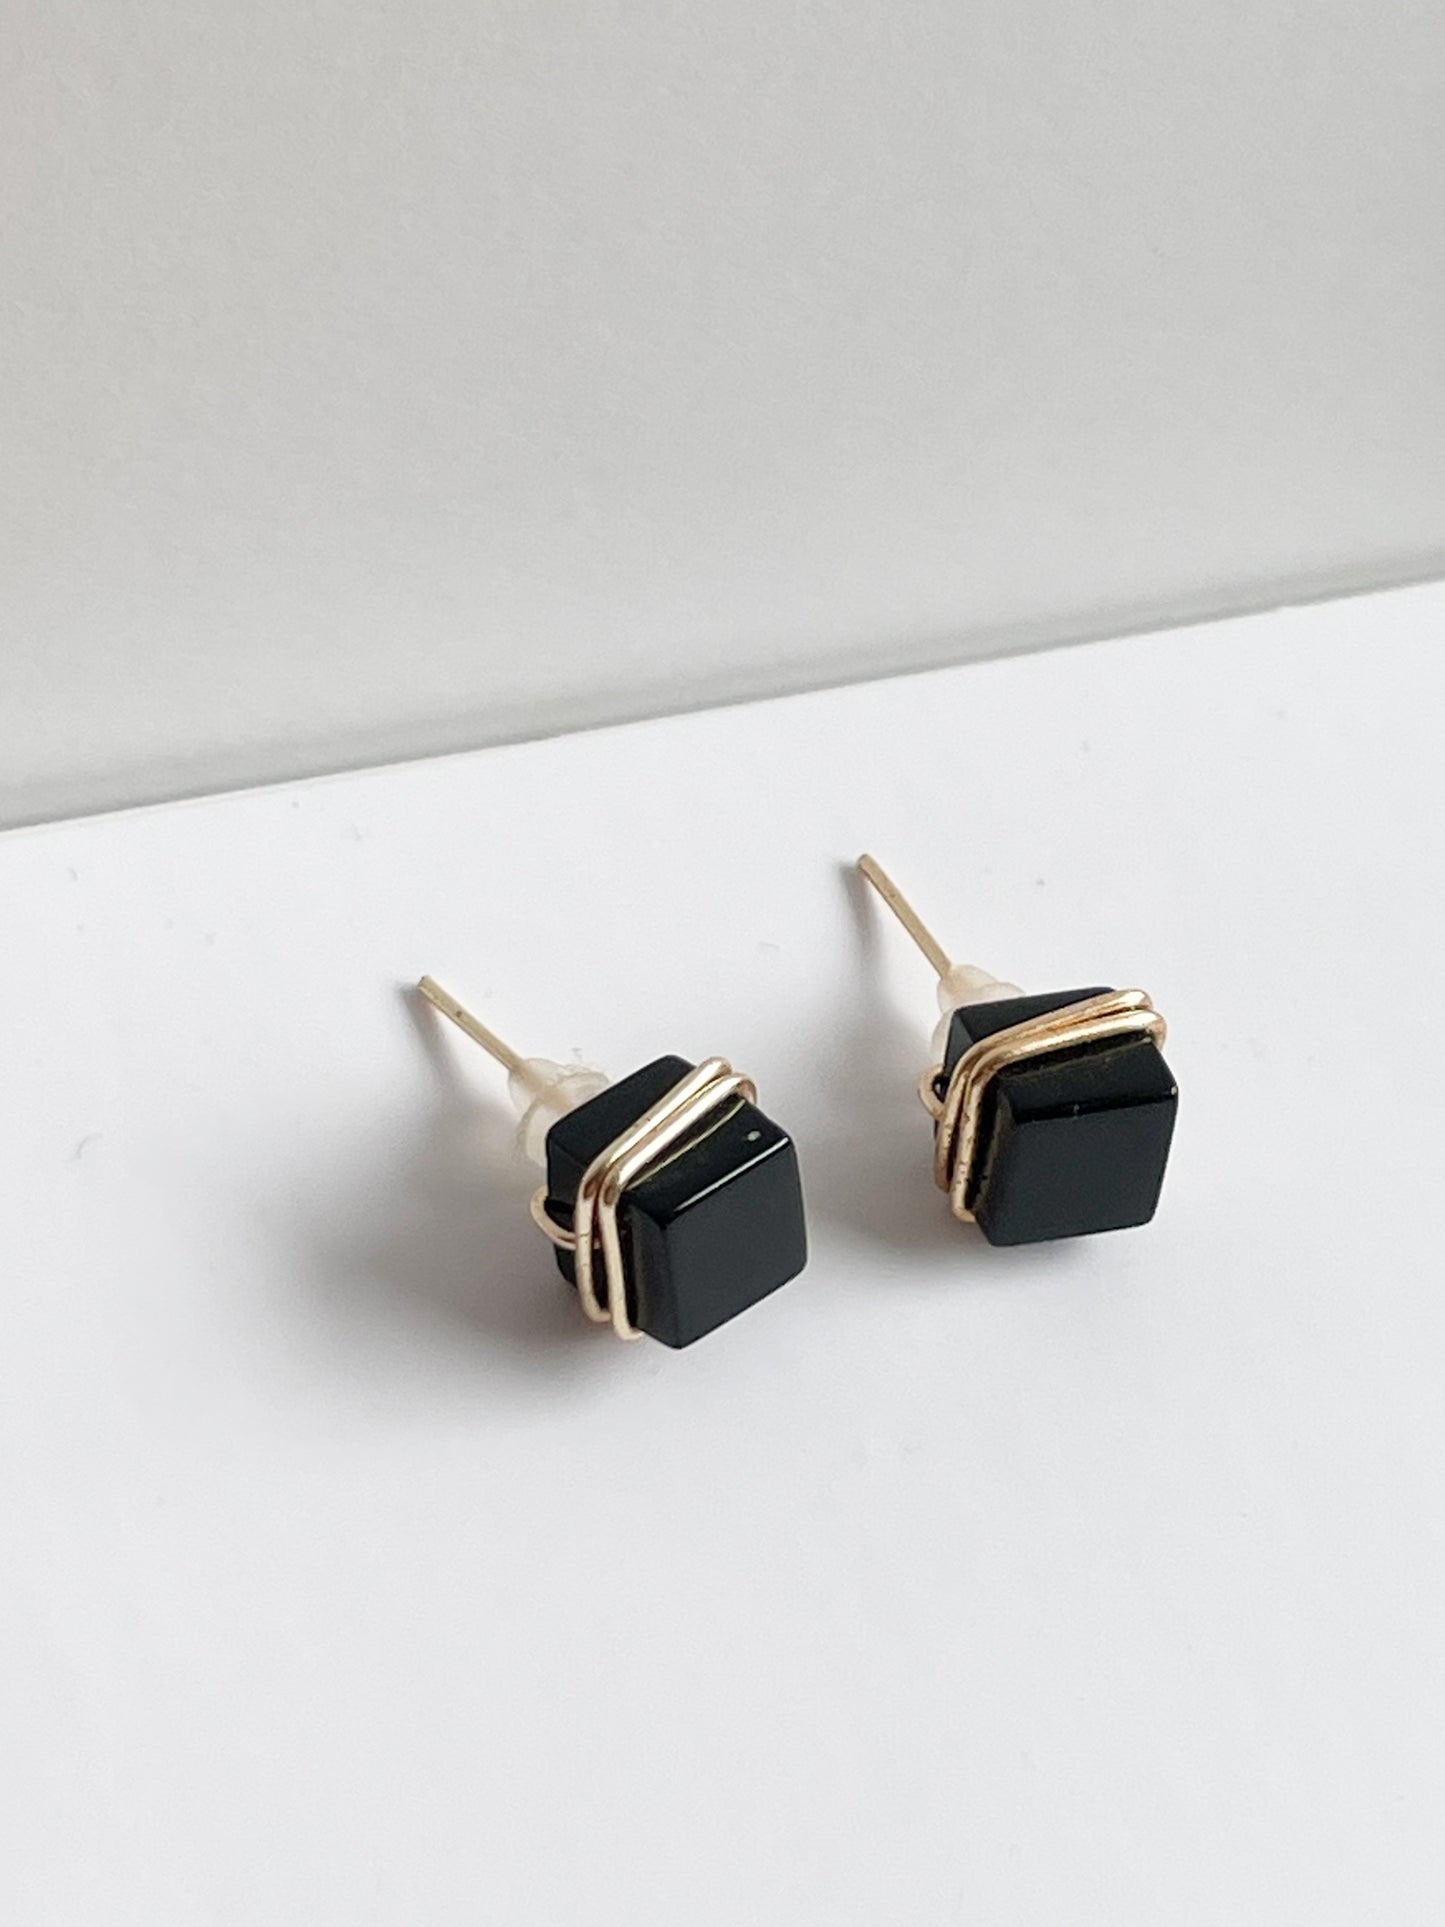 Black Cube Gold Wire Stud Earrings - Handmade from Colombia